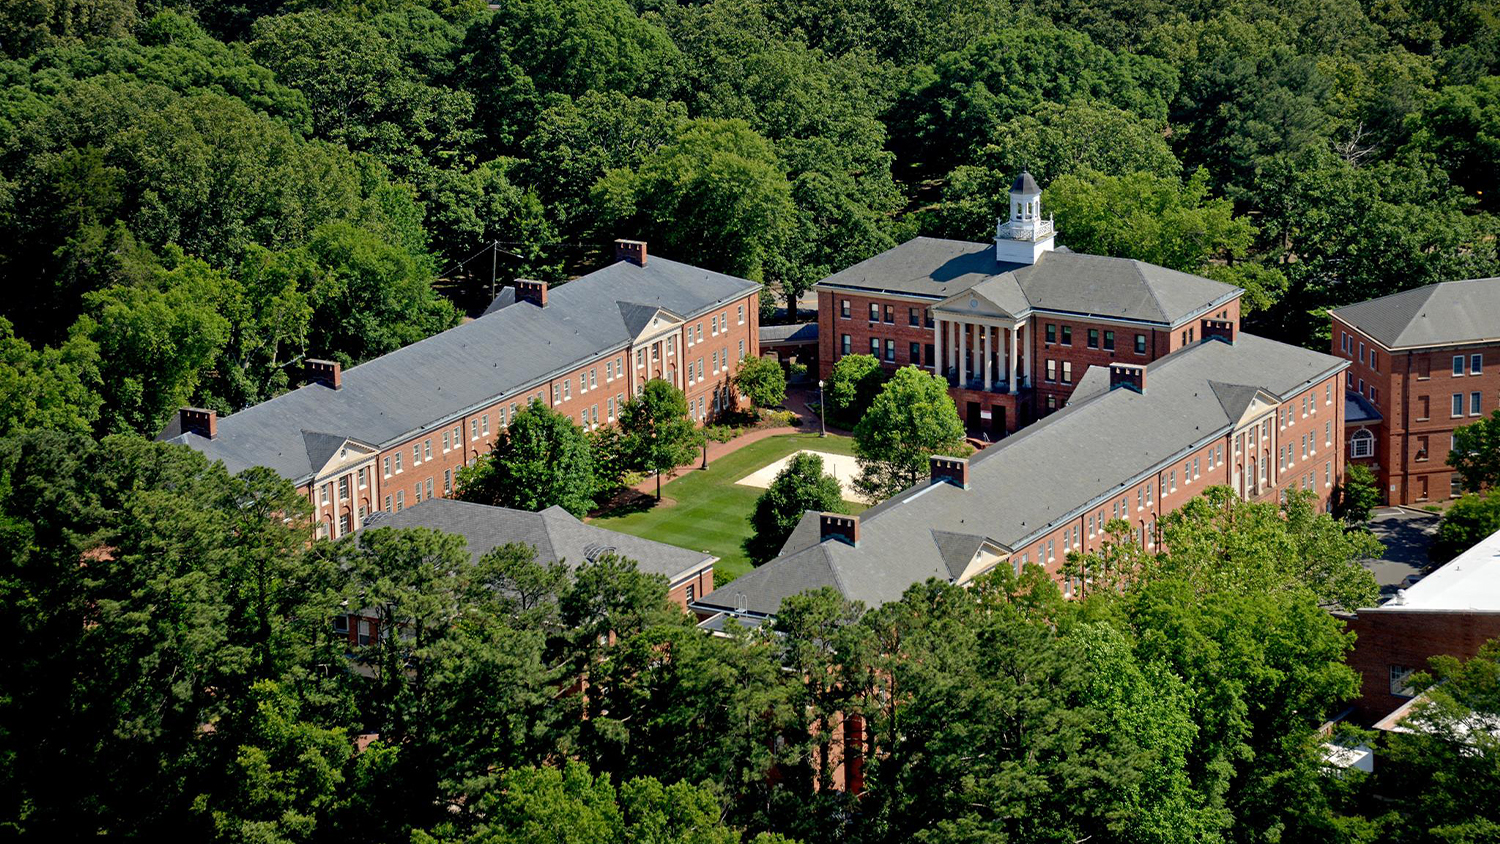 Aerial view of the Honors and Scholars Village, also known as the Quad